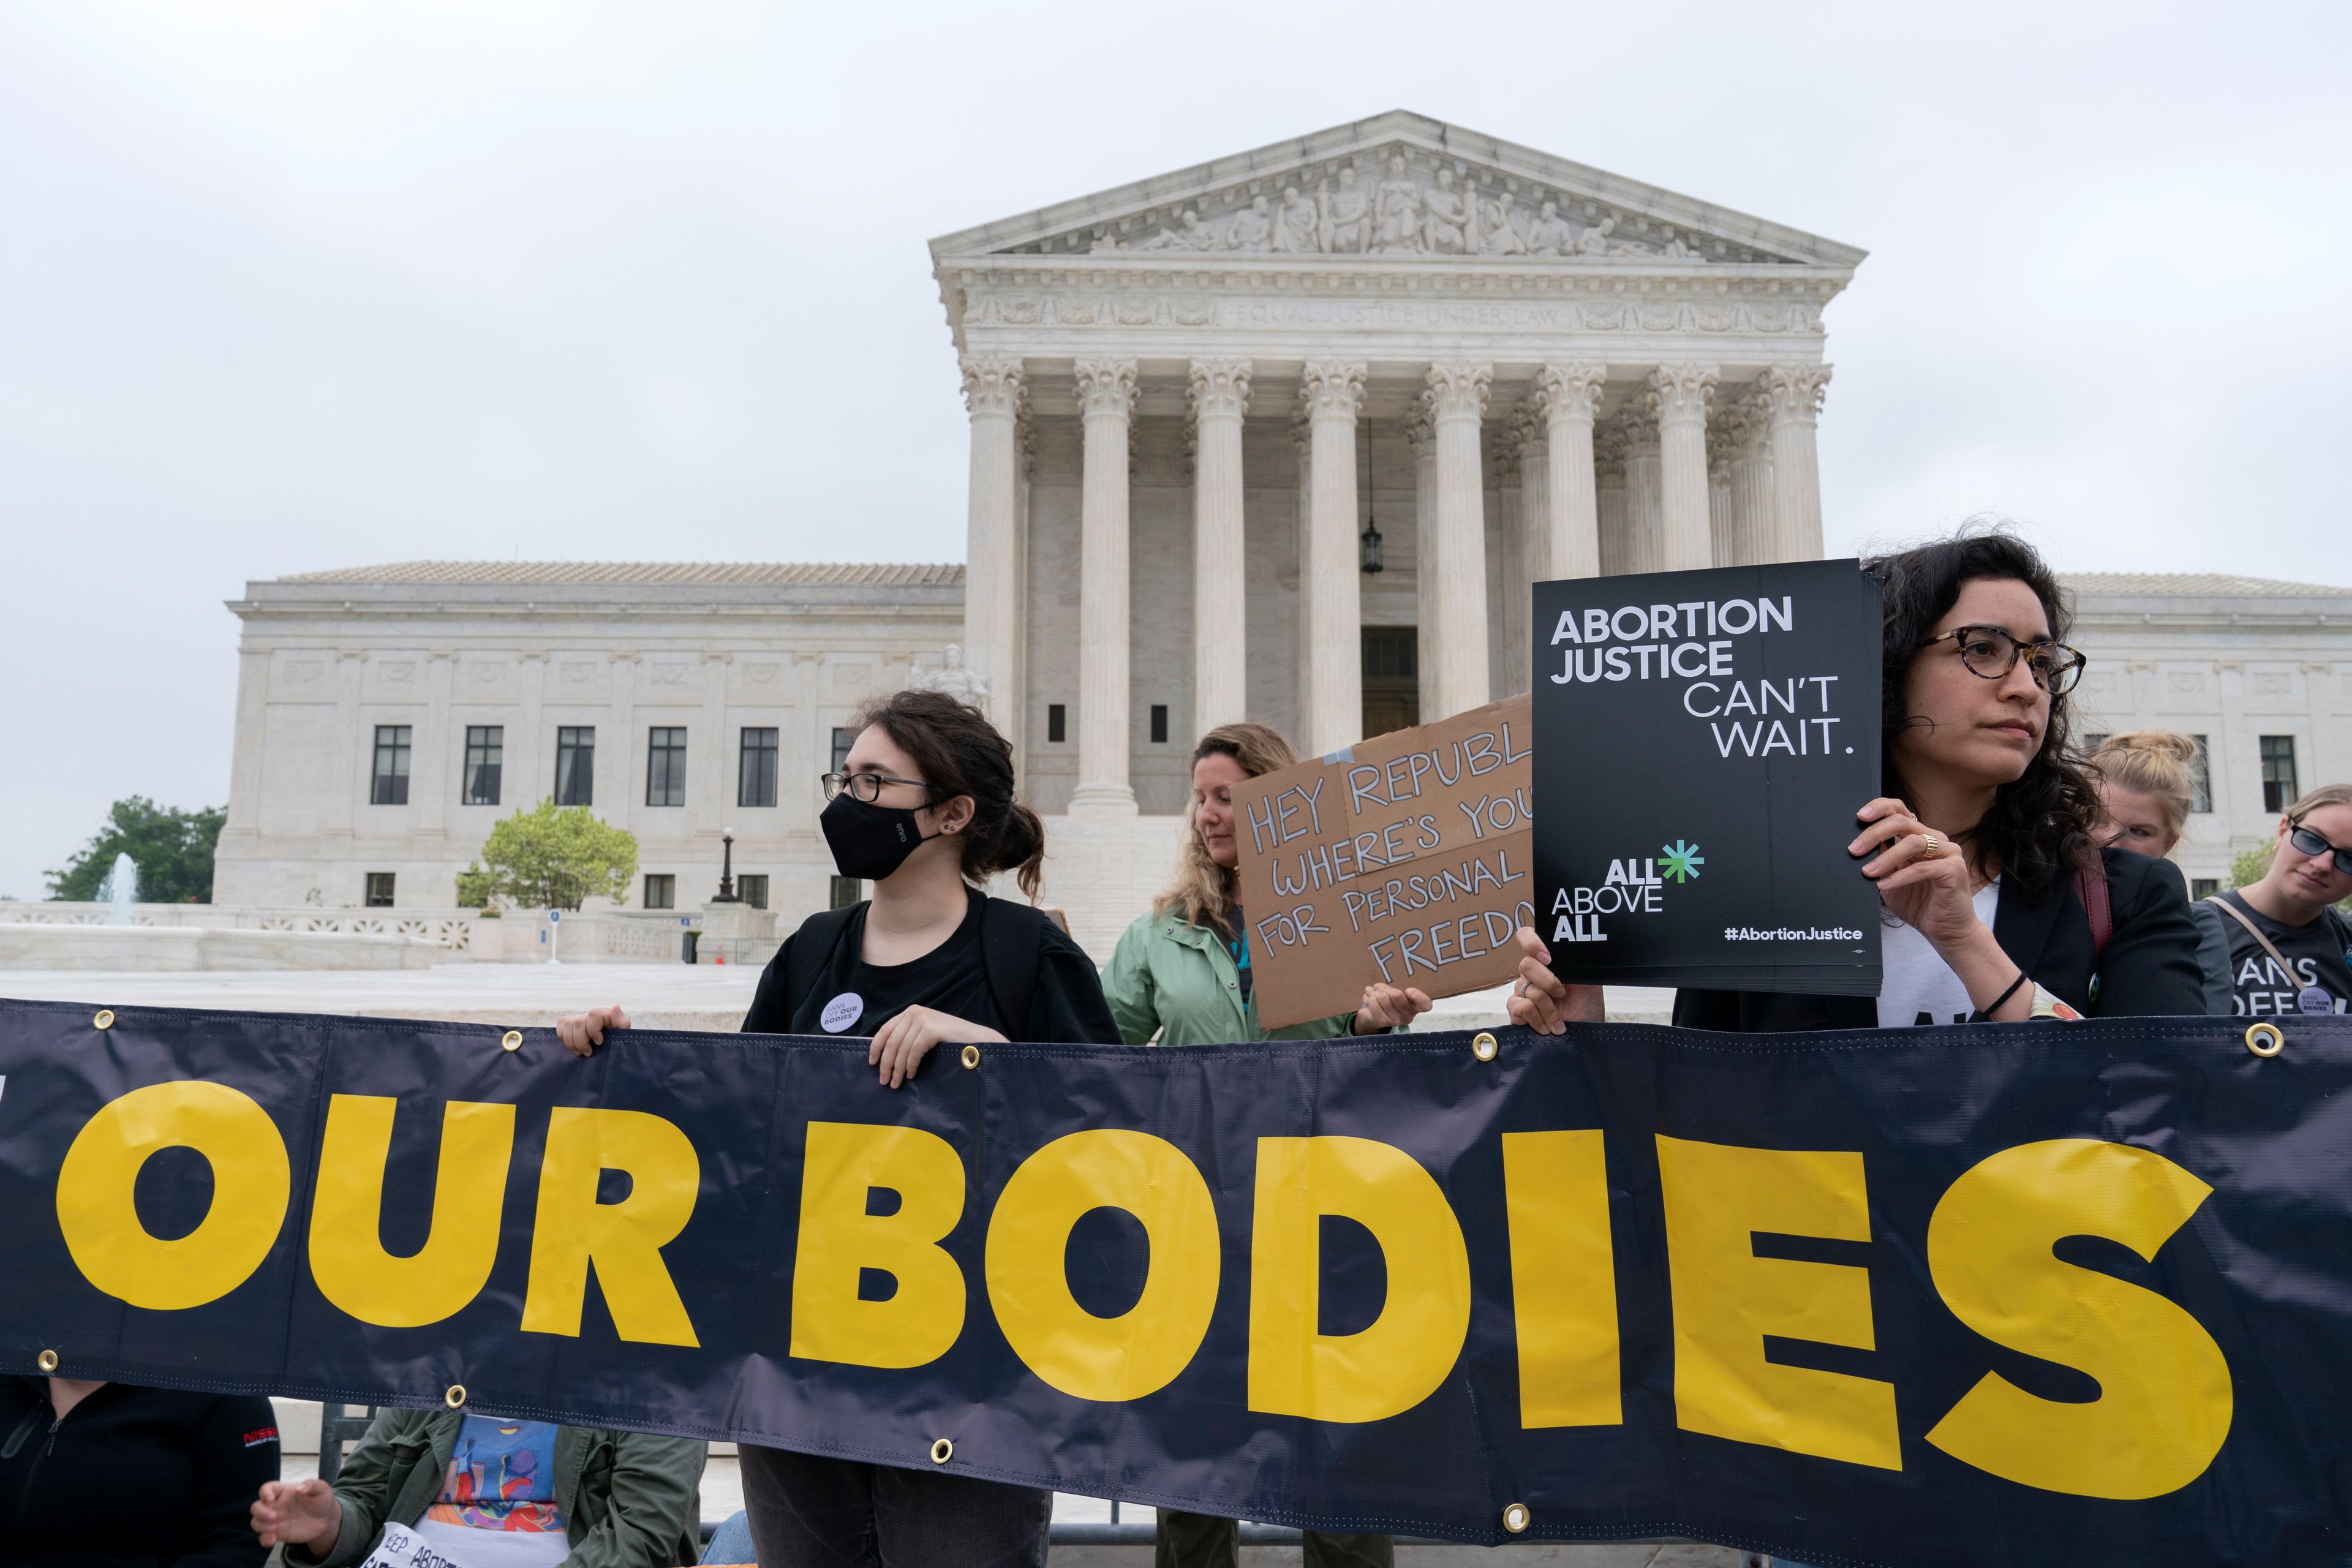 Demonstrators protest outside of the U.S. Supreme Court Tuesday, May 3, 2022 in Washington. (Jose Luis Magana/Associated Press)